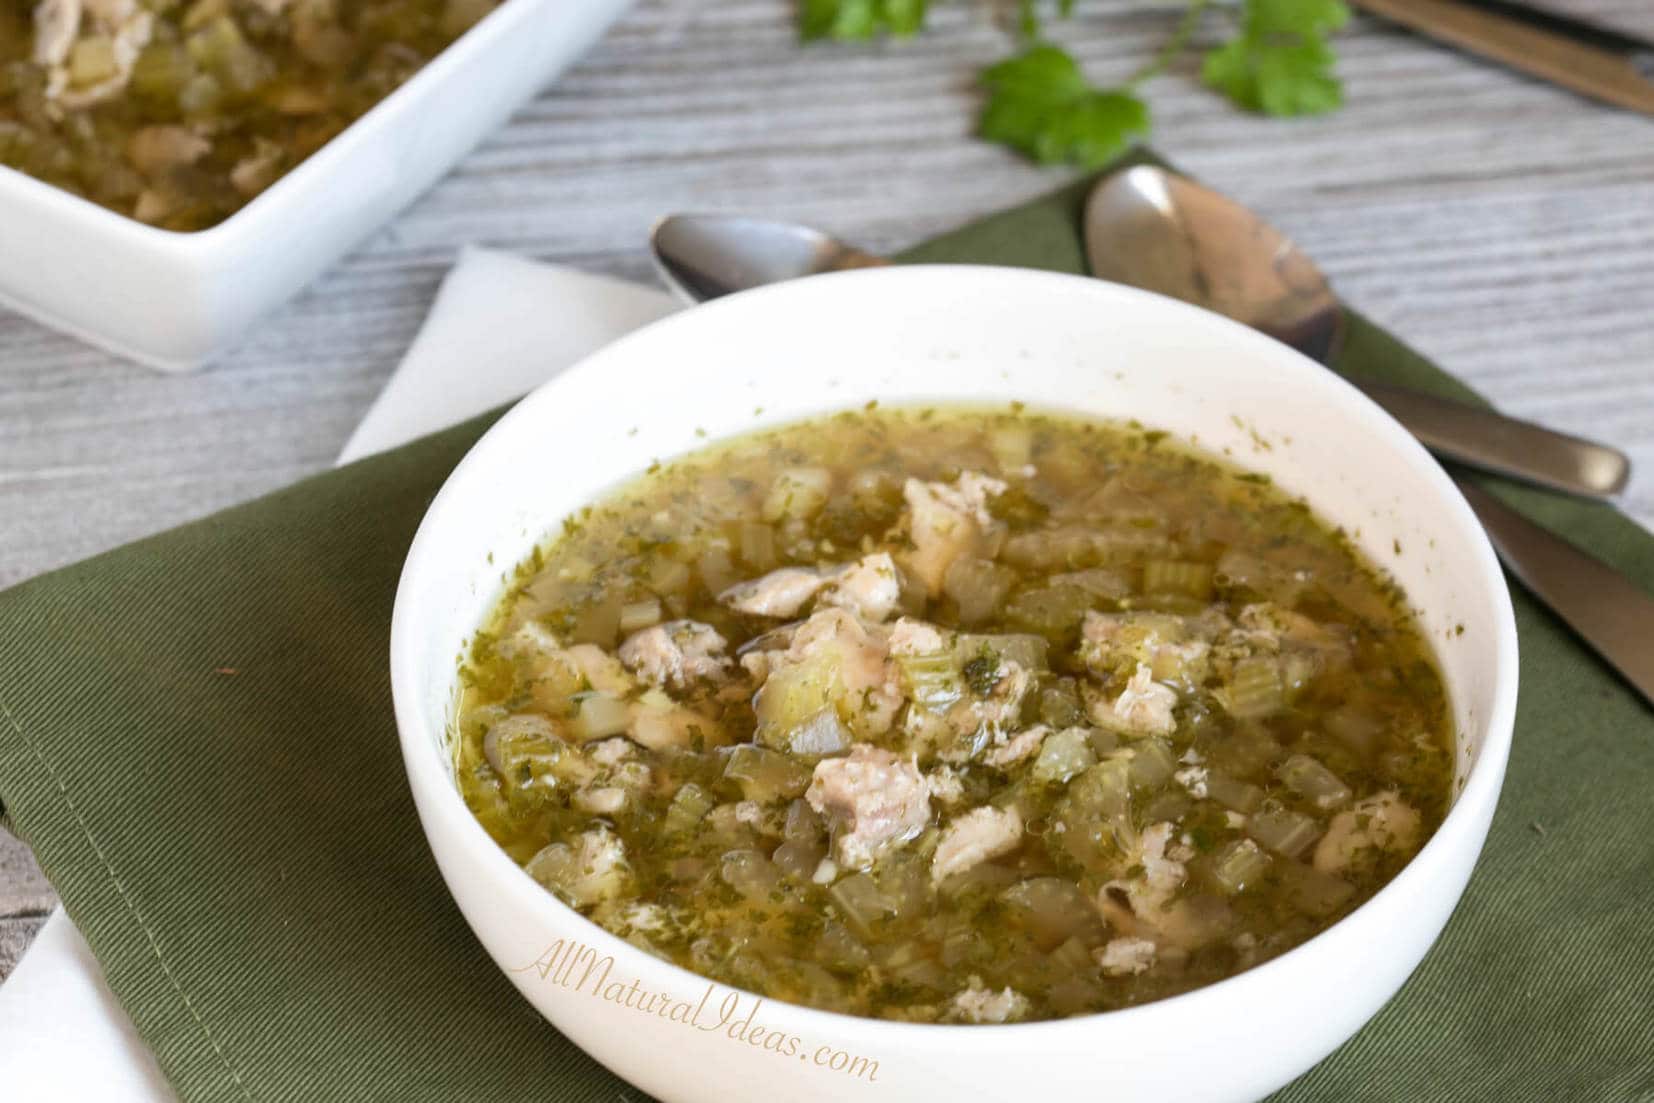 An easy chicken soup recipe for colds and flu that helps relieve common symptoms. Keep some chicken broth handy to make this low carb chicken soup any time.